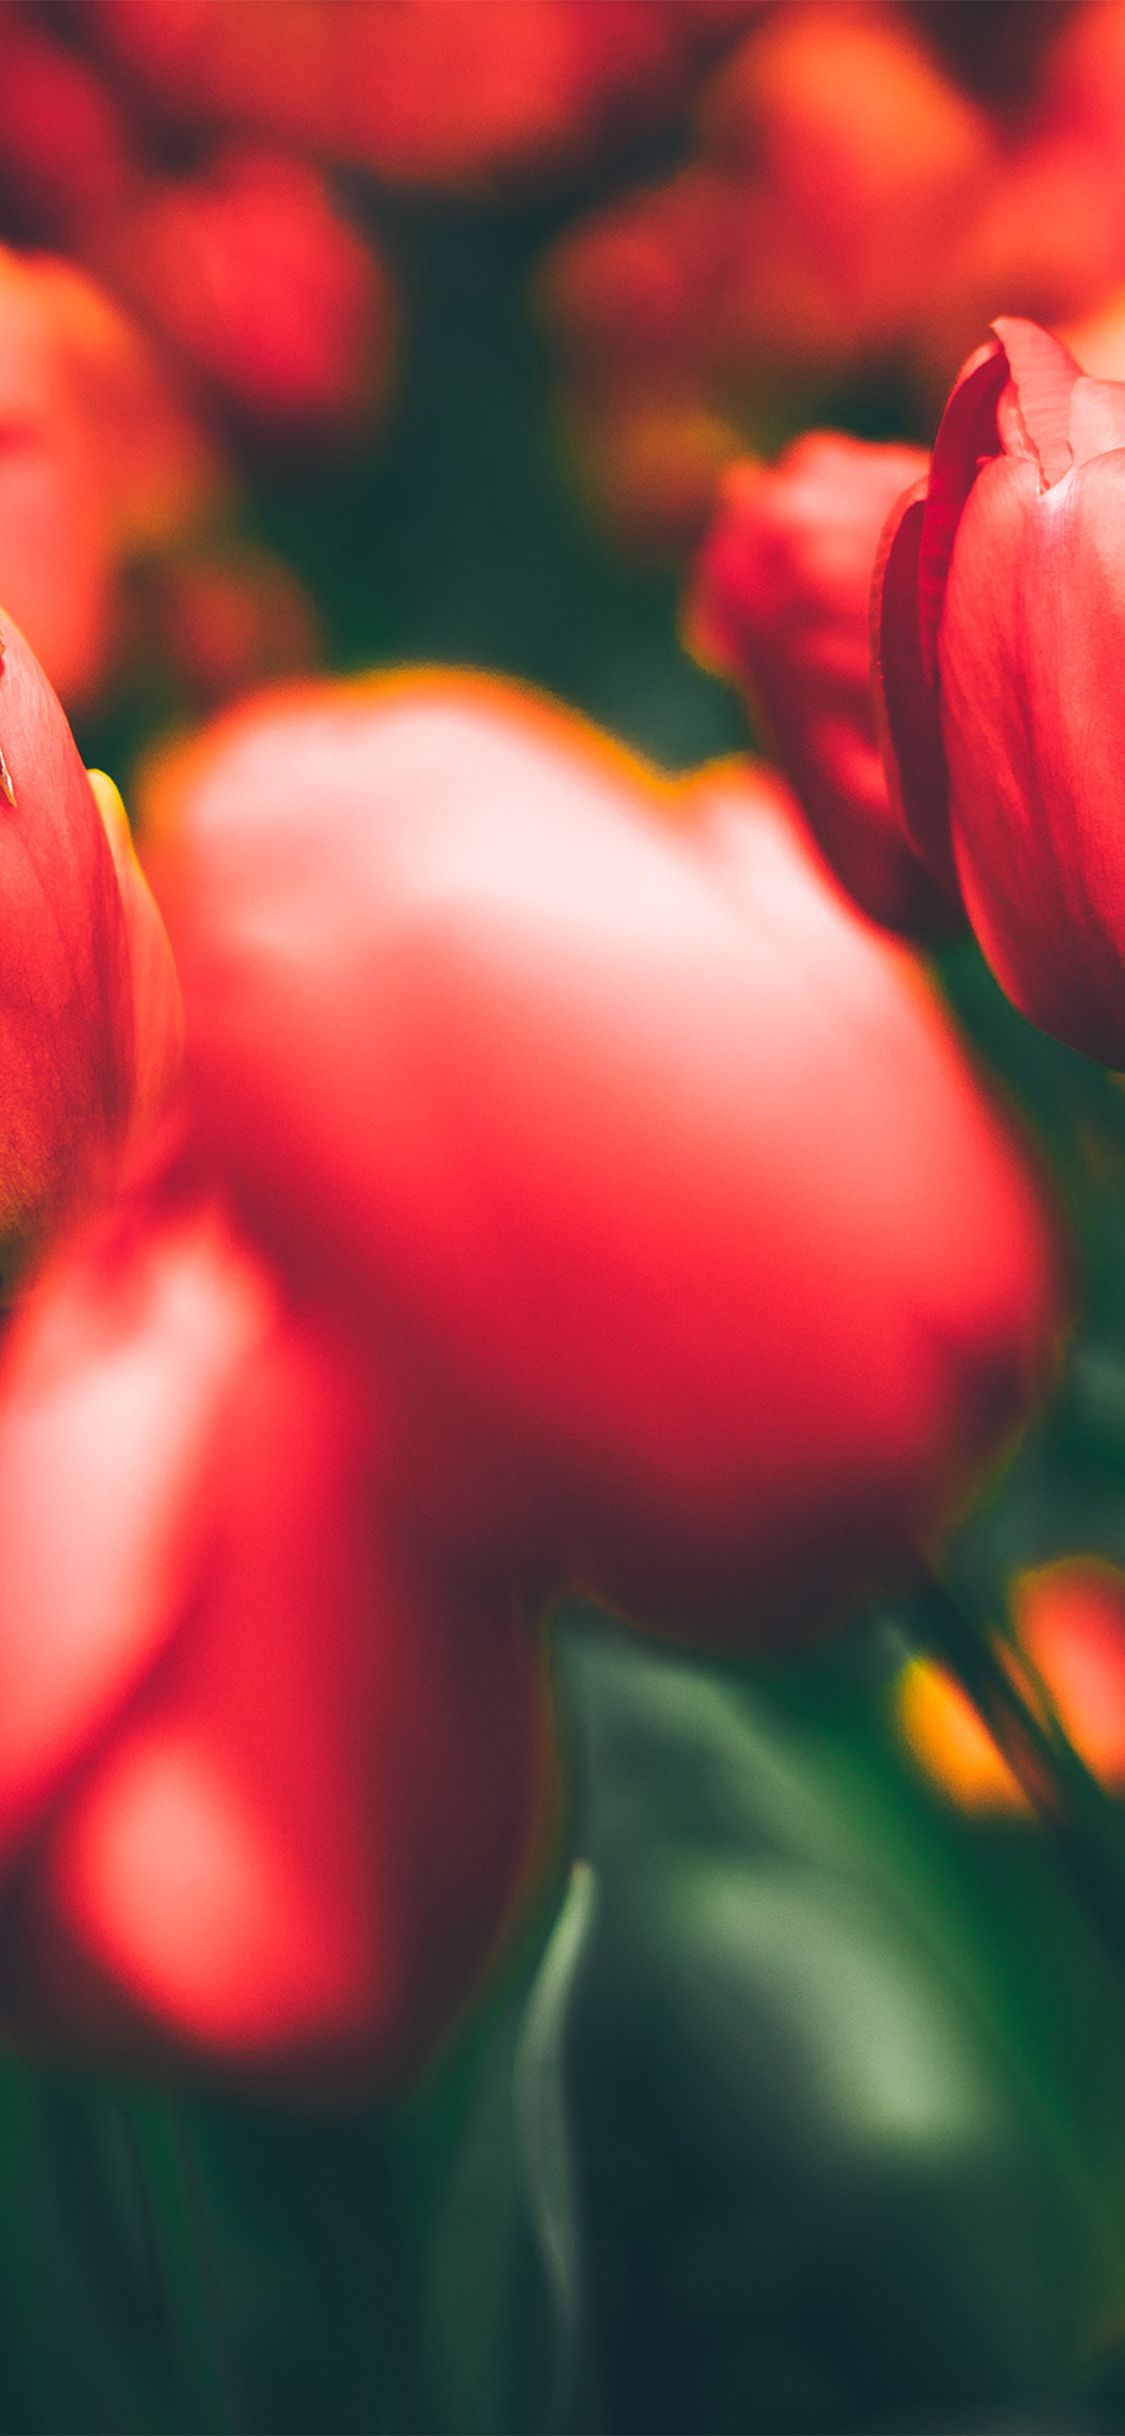 iPhone X wallpaper. tulips red flower